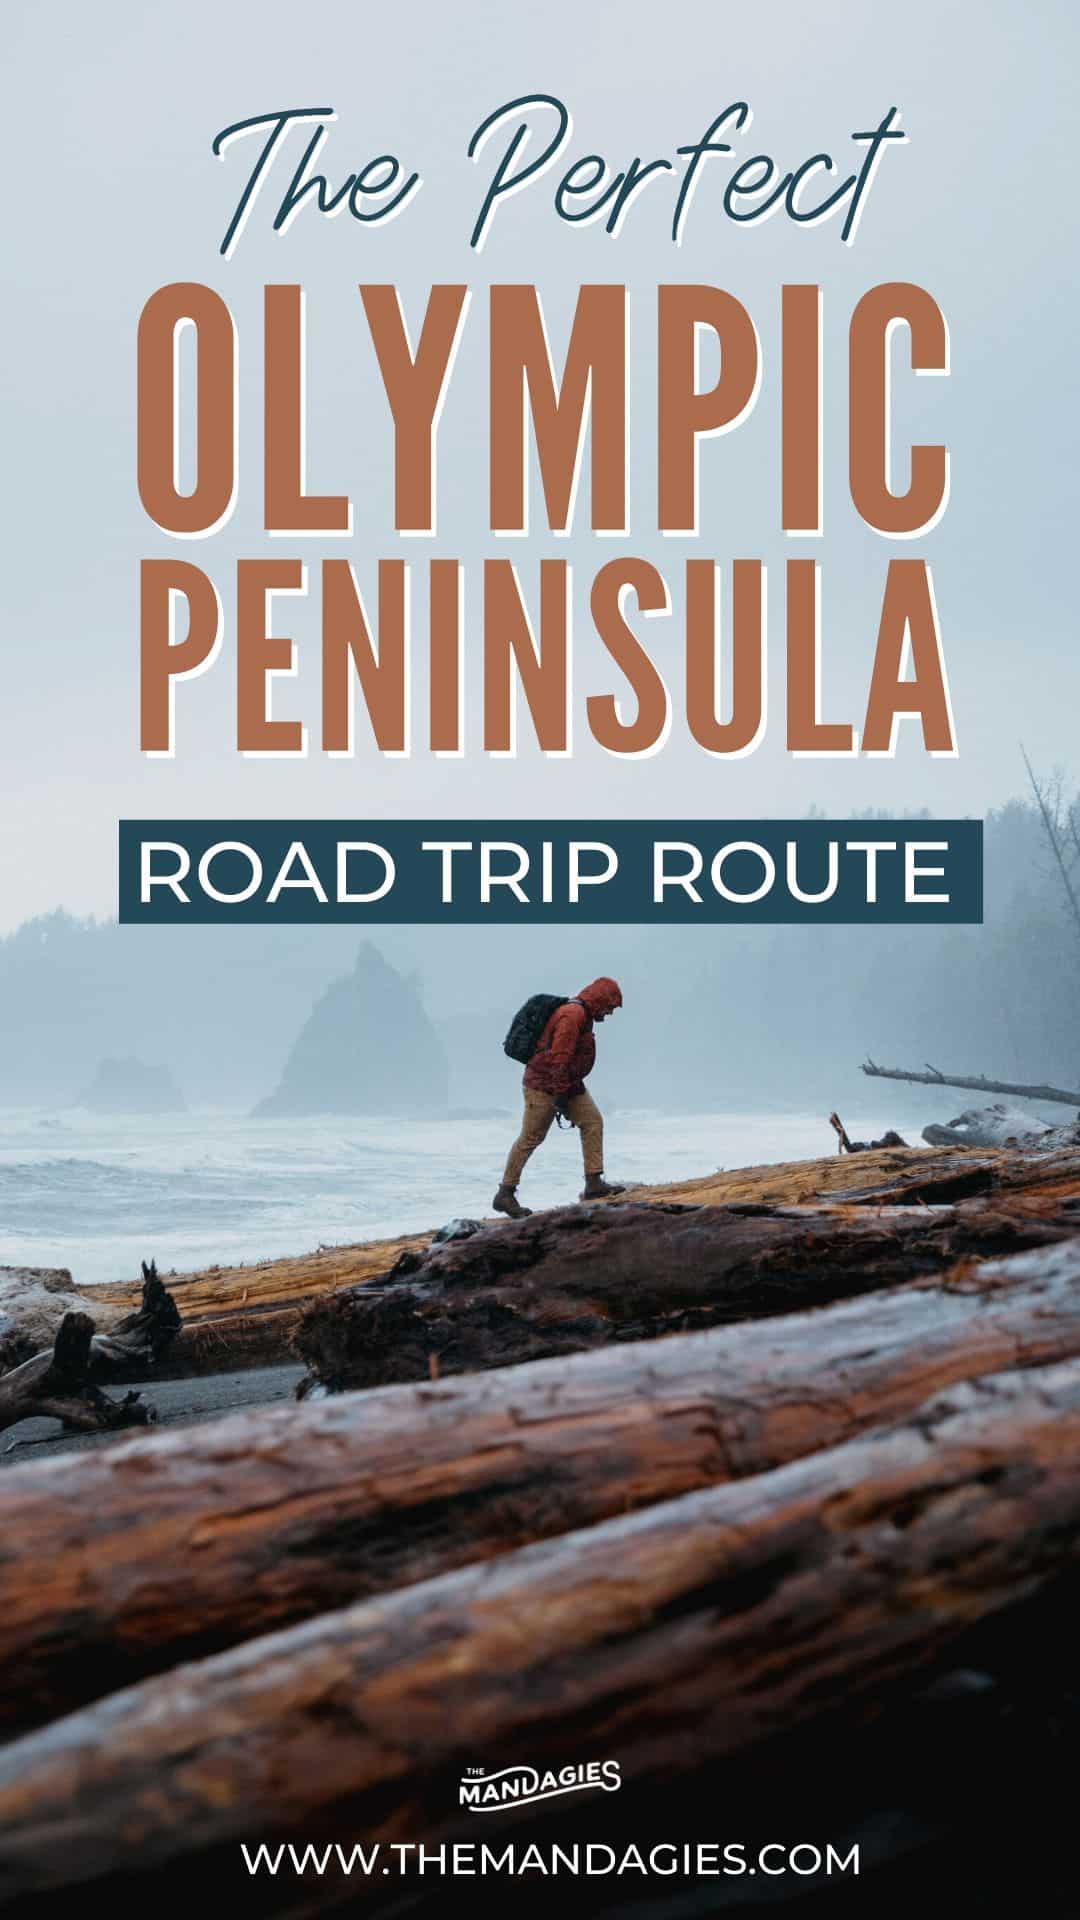 Looking for the best road trip around the Olympic National Park in Washington? Look no further! We're sharing the best Olympic Peninsula road trip route, including Cape Flattery, La Push Beach, the Hoh Rainforest, and so much more! Save this post for your next trip to Washington State! #olympicnationalpark #Washington #PNW #pacificnorthwest #hurricaneridge #hohrainforest #hiking #photography #rainforest